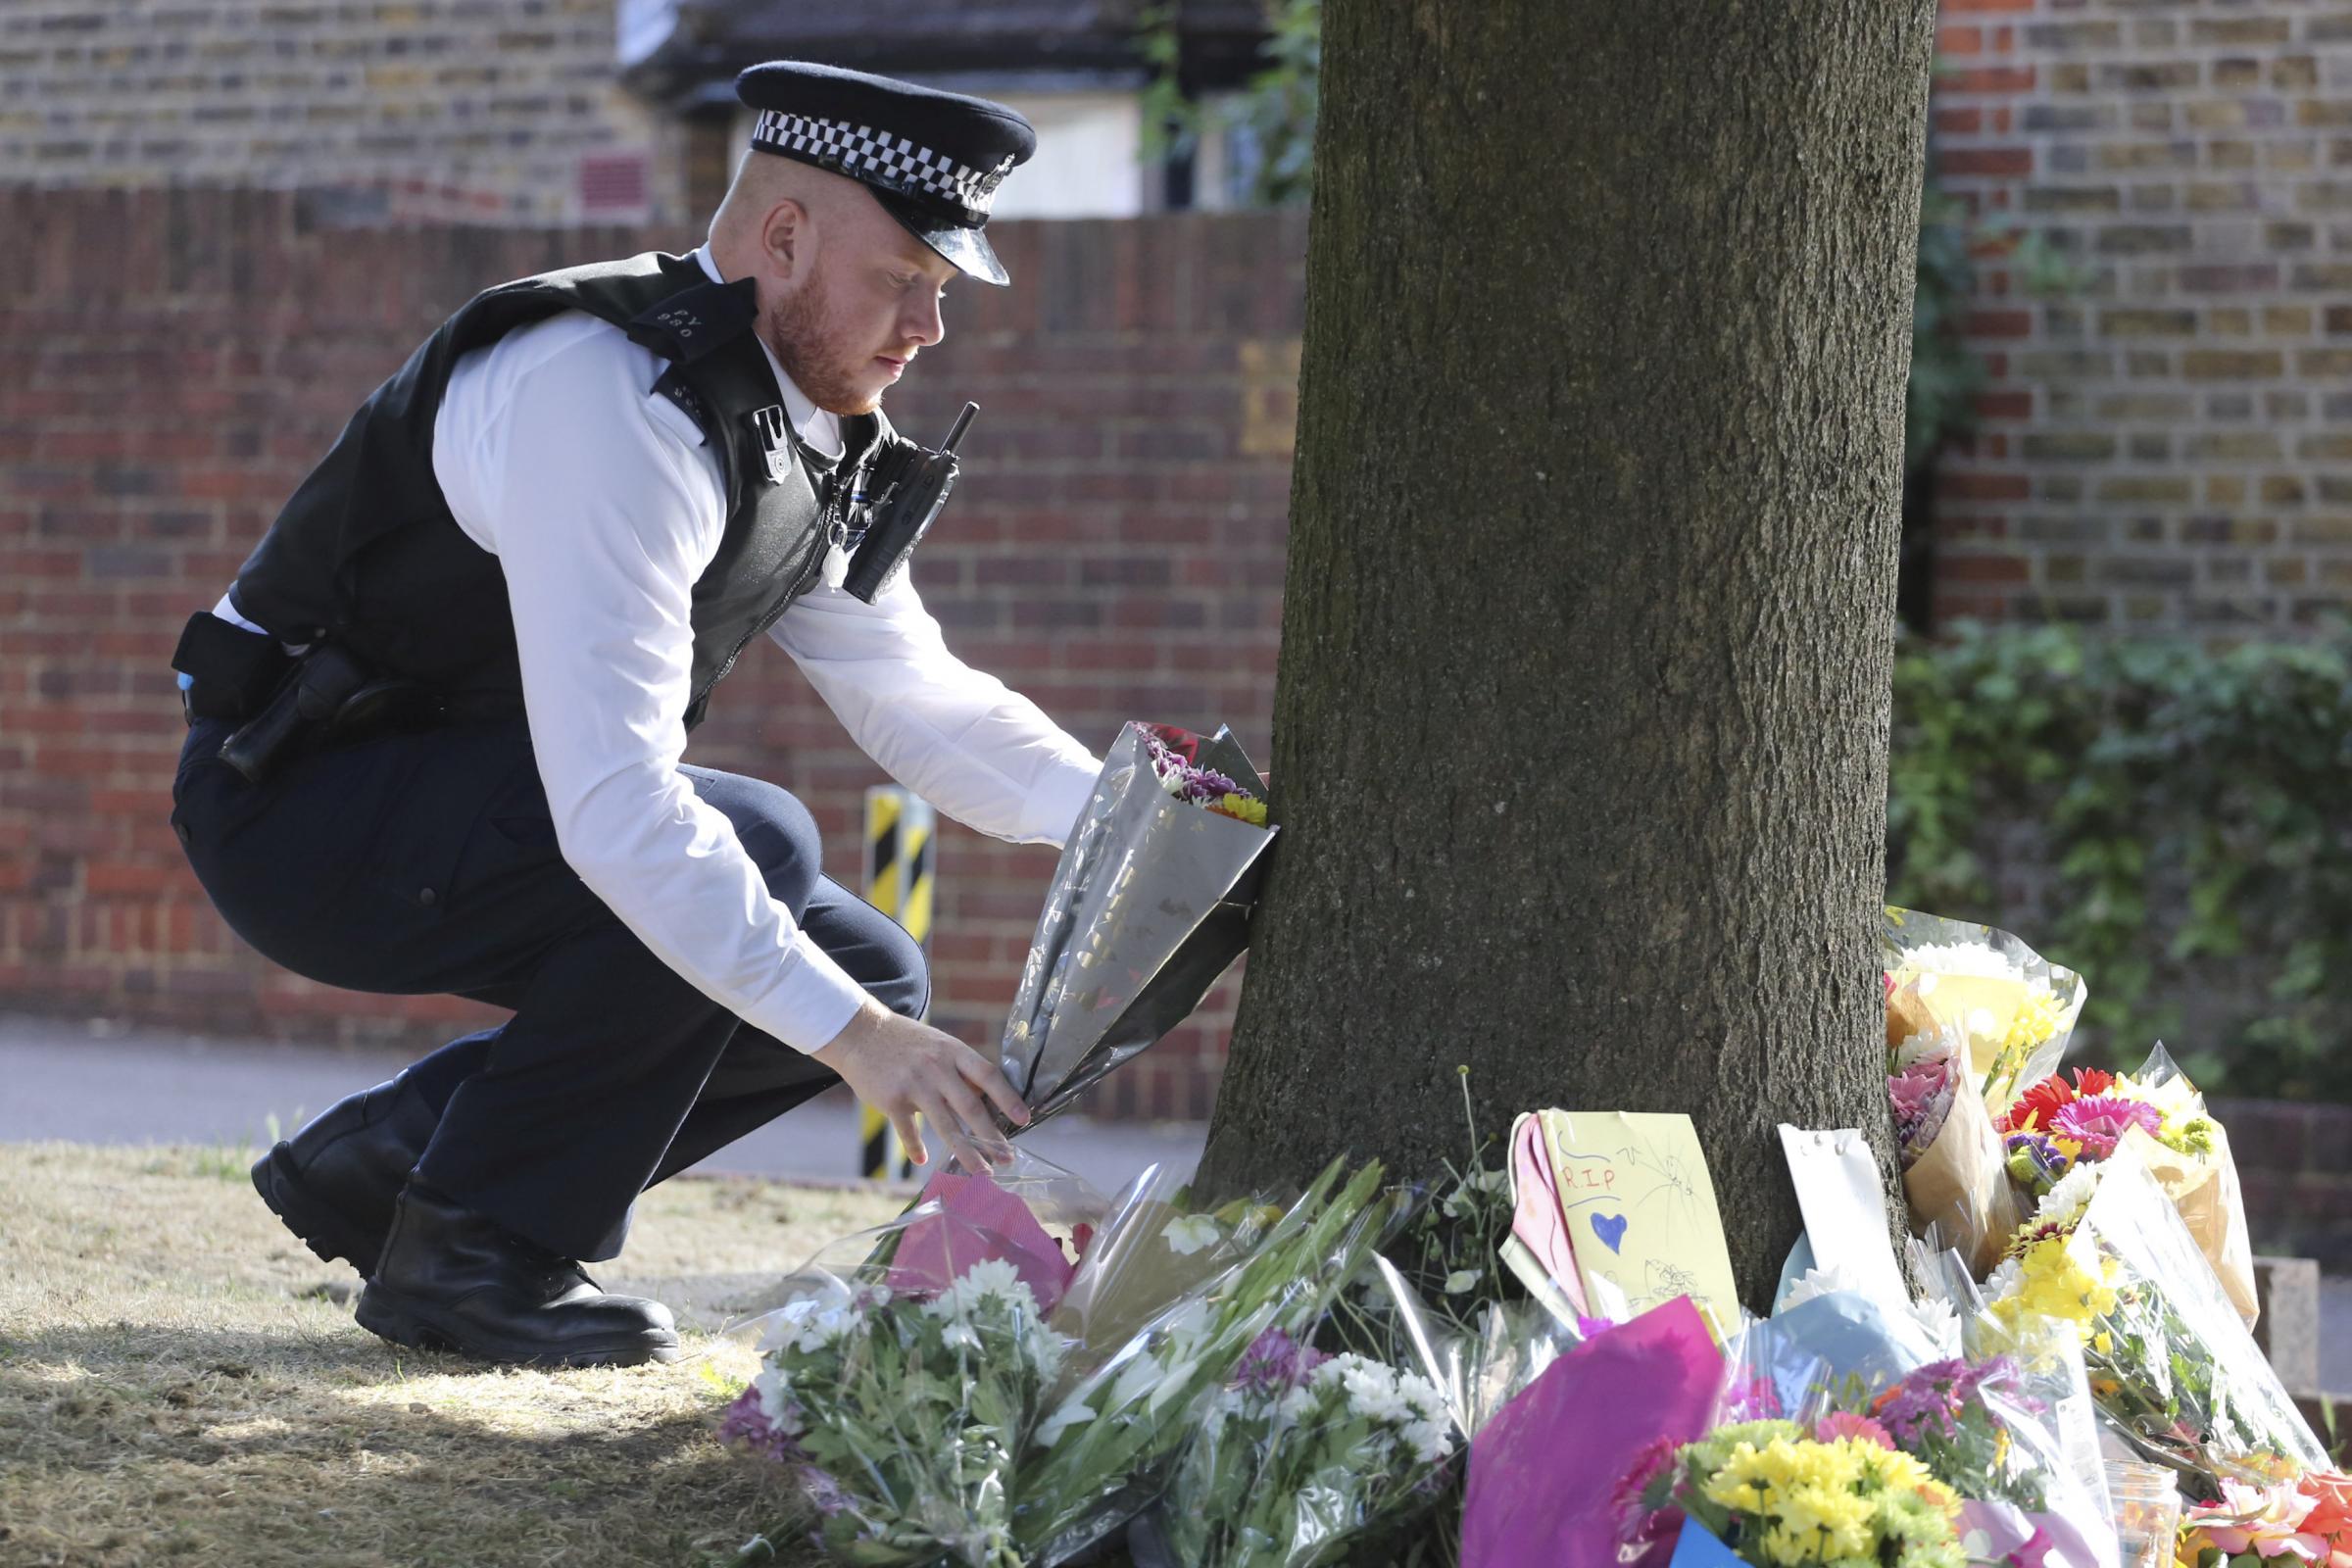 Tributes were left at the scene of the tragic incident